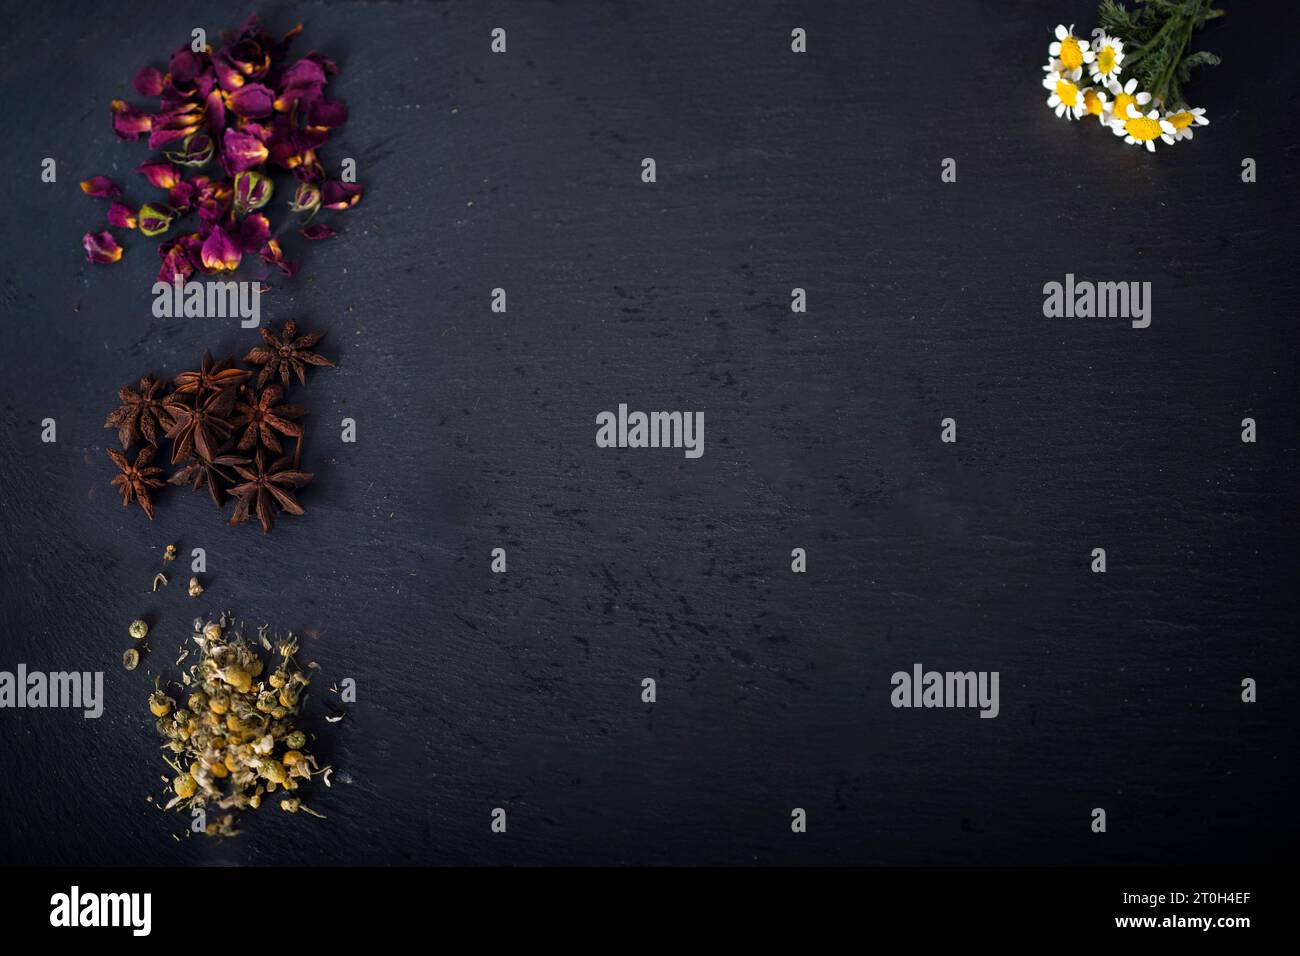 slate with space text with flower and plant Stock Photo